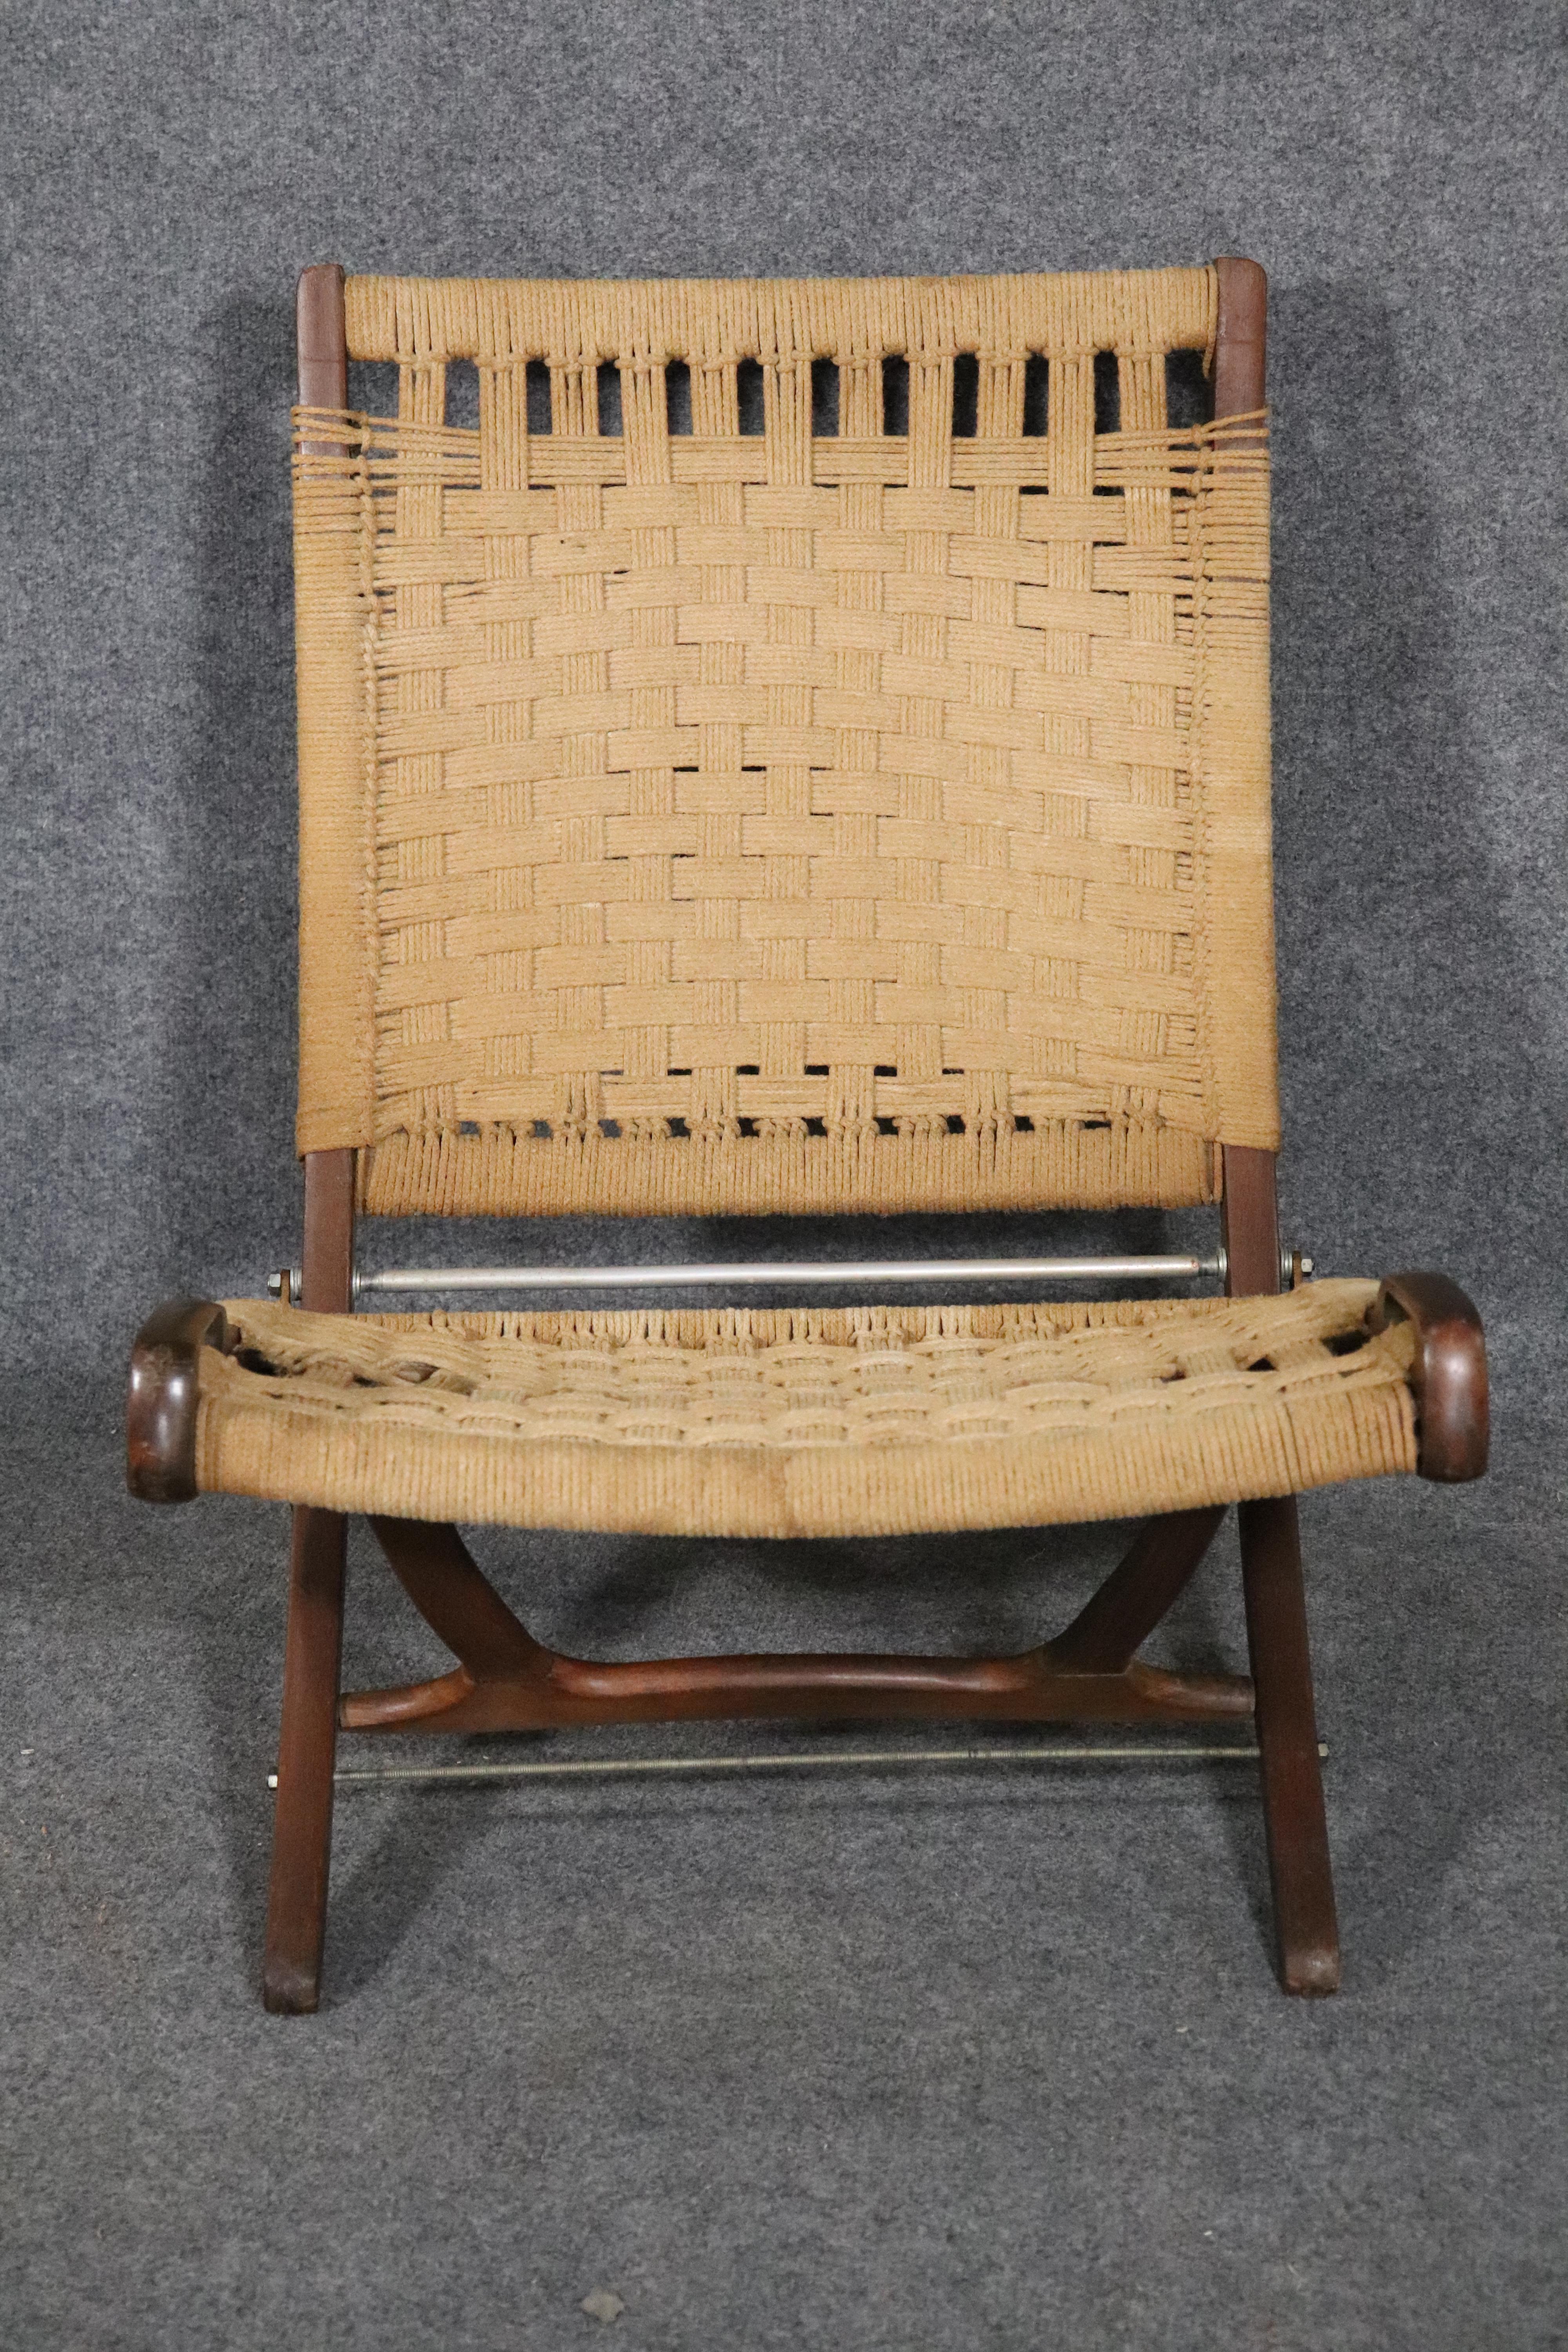 Mid-Century Modern folding lounge chair in the iconic style of Hans Wegner. Strong walnut frame with woven rope seating.
Please confirm location NY or NJ.